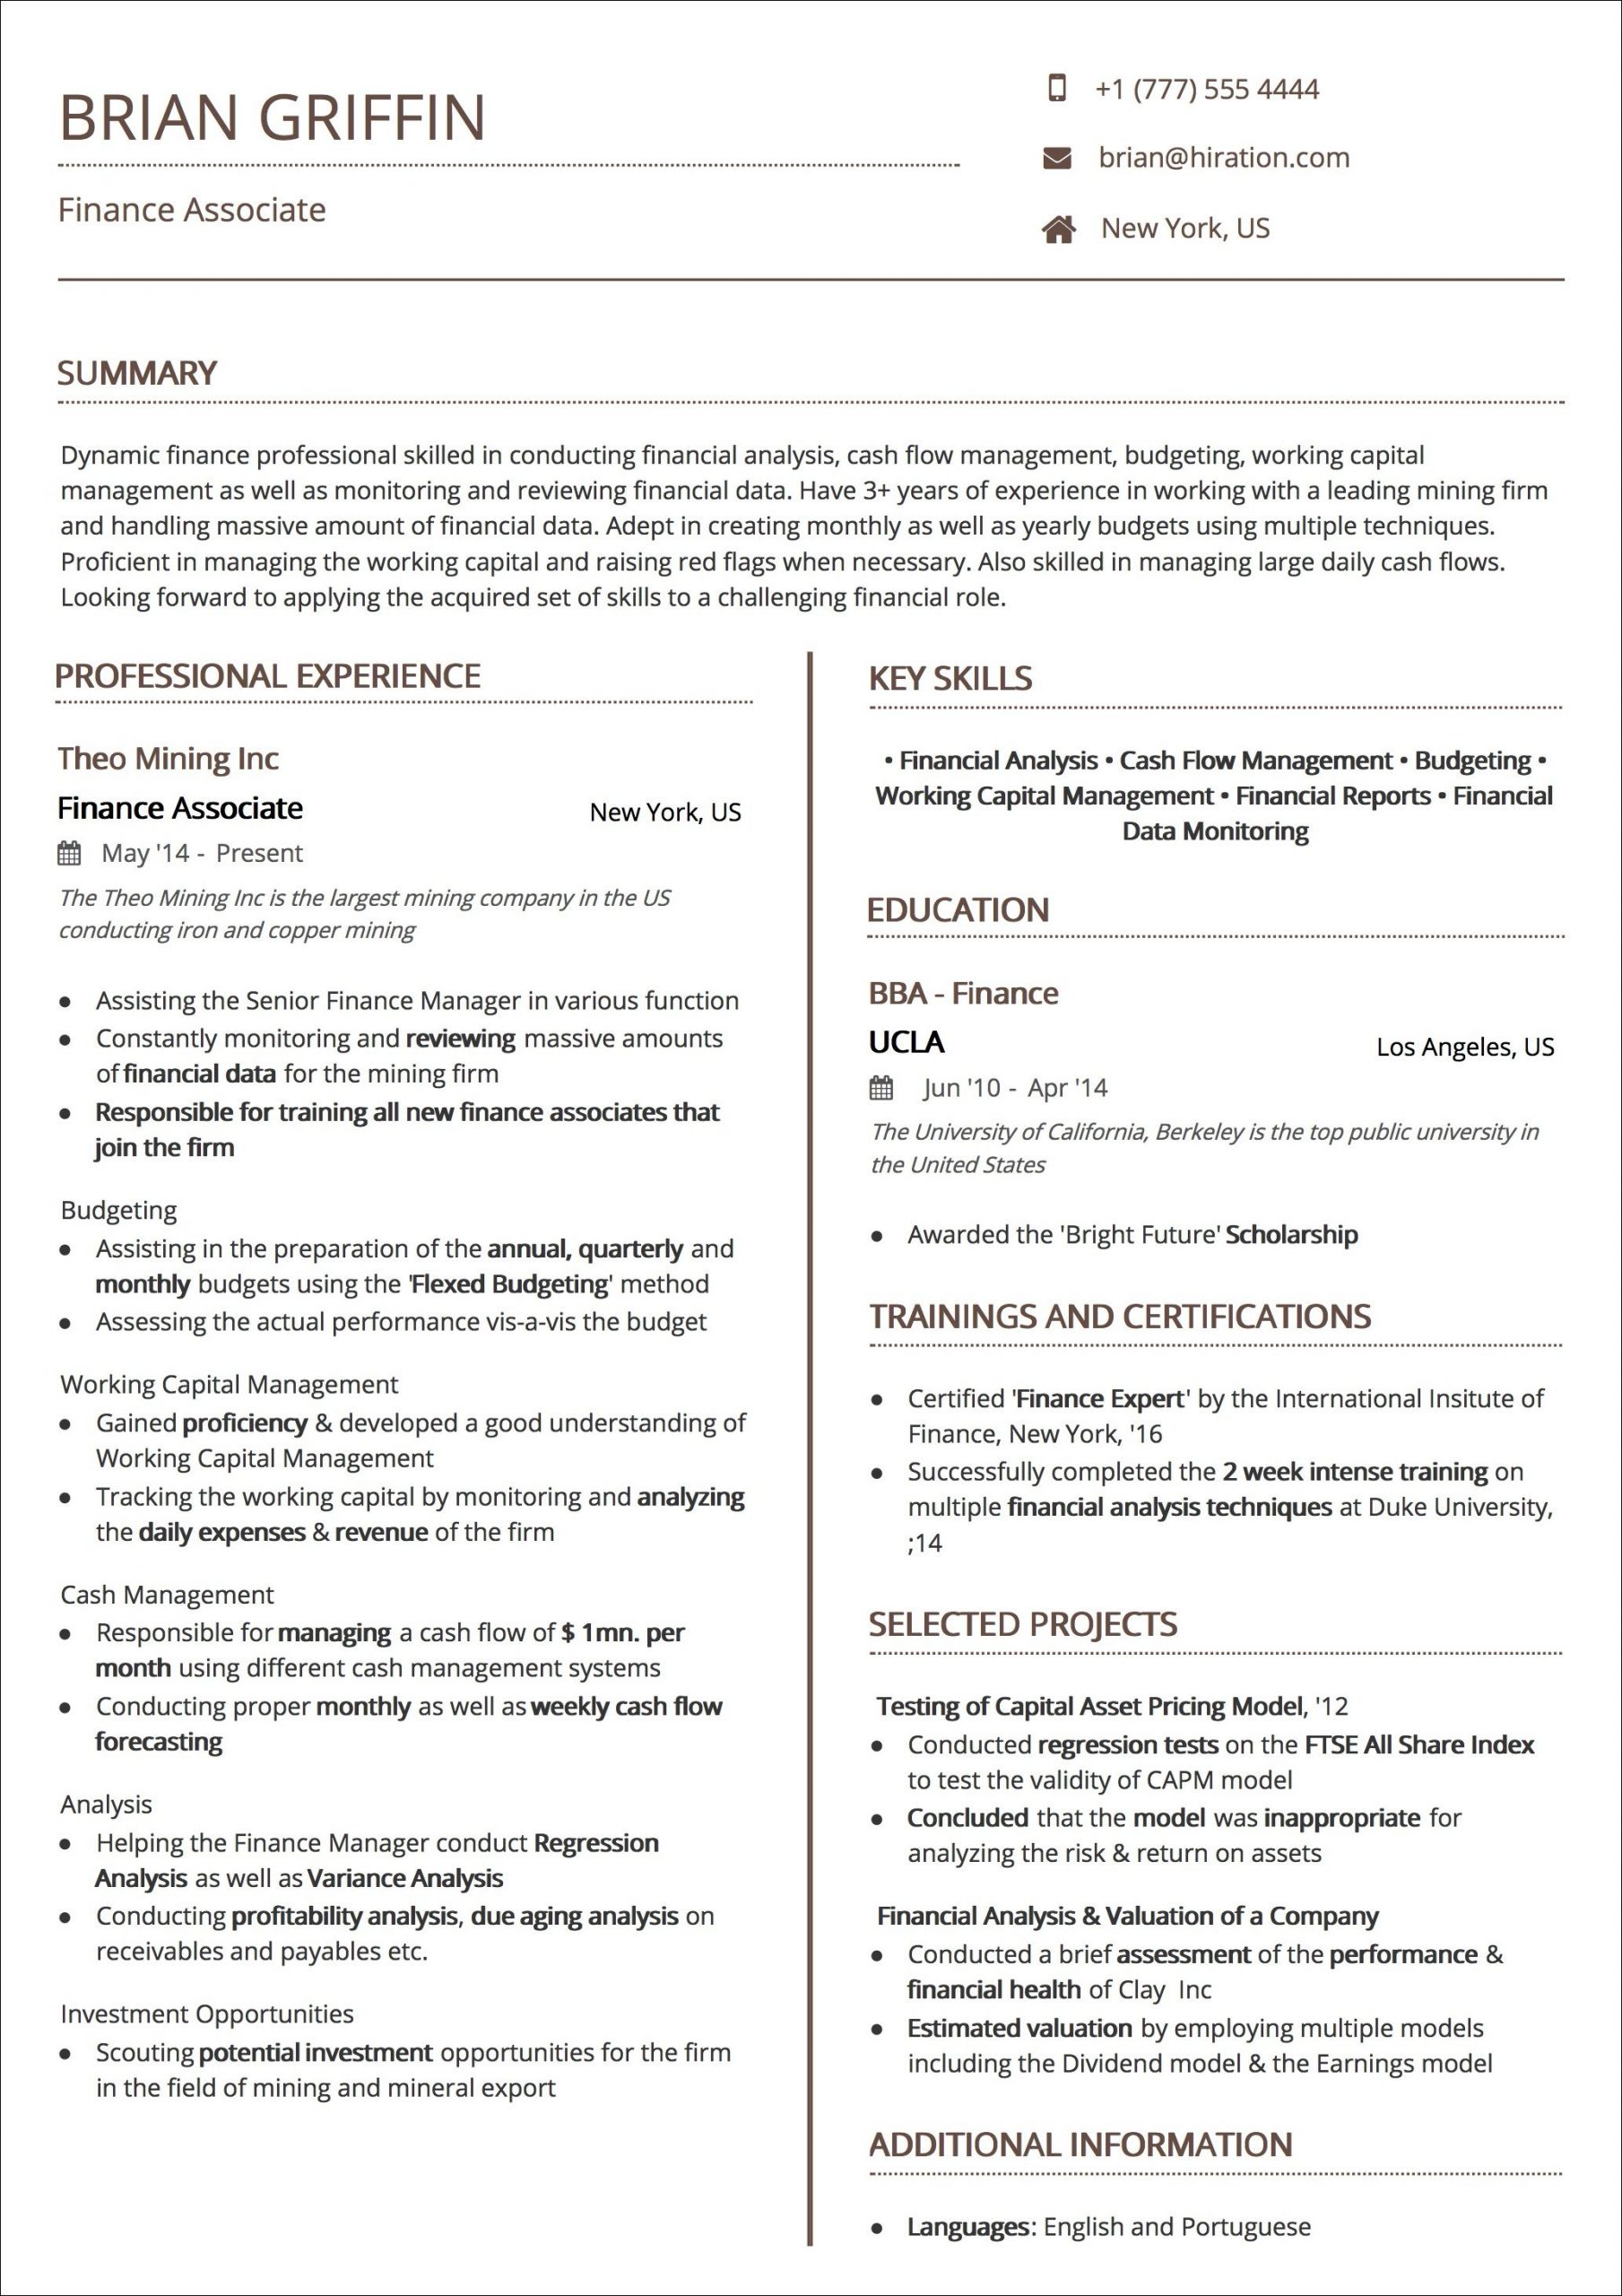 Resume Templates The 2020 Guide To Choosing The Best regarding measurements 2067 X 2925